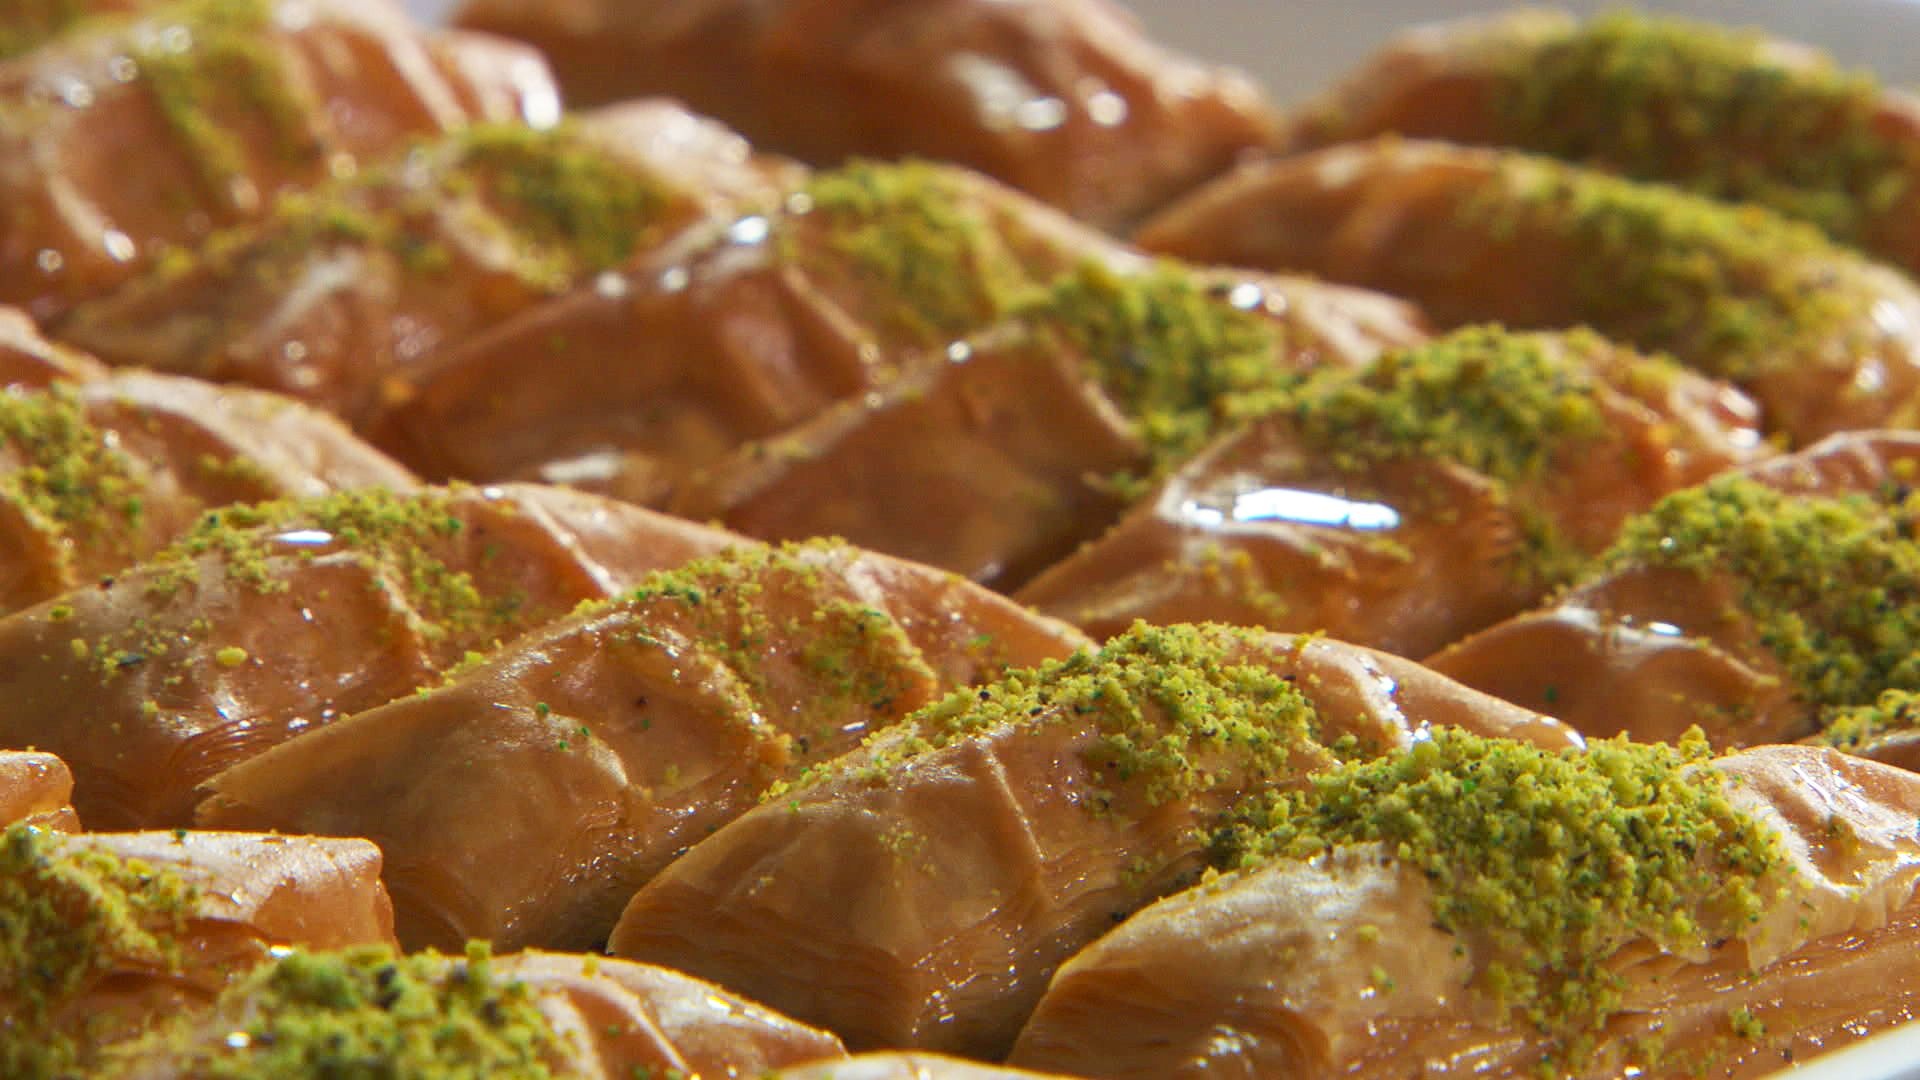 Baklava: Found in Middle Eastern and Mediterranean restaurants and bakeries. 1920x1080 Full HD Wallpaper.